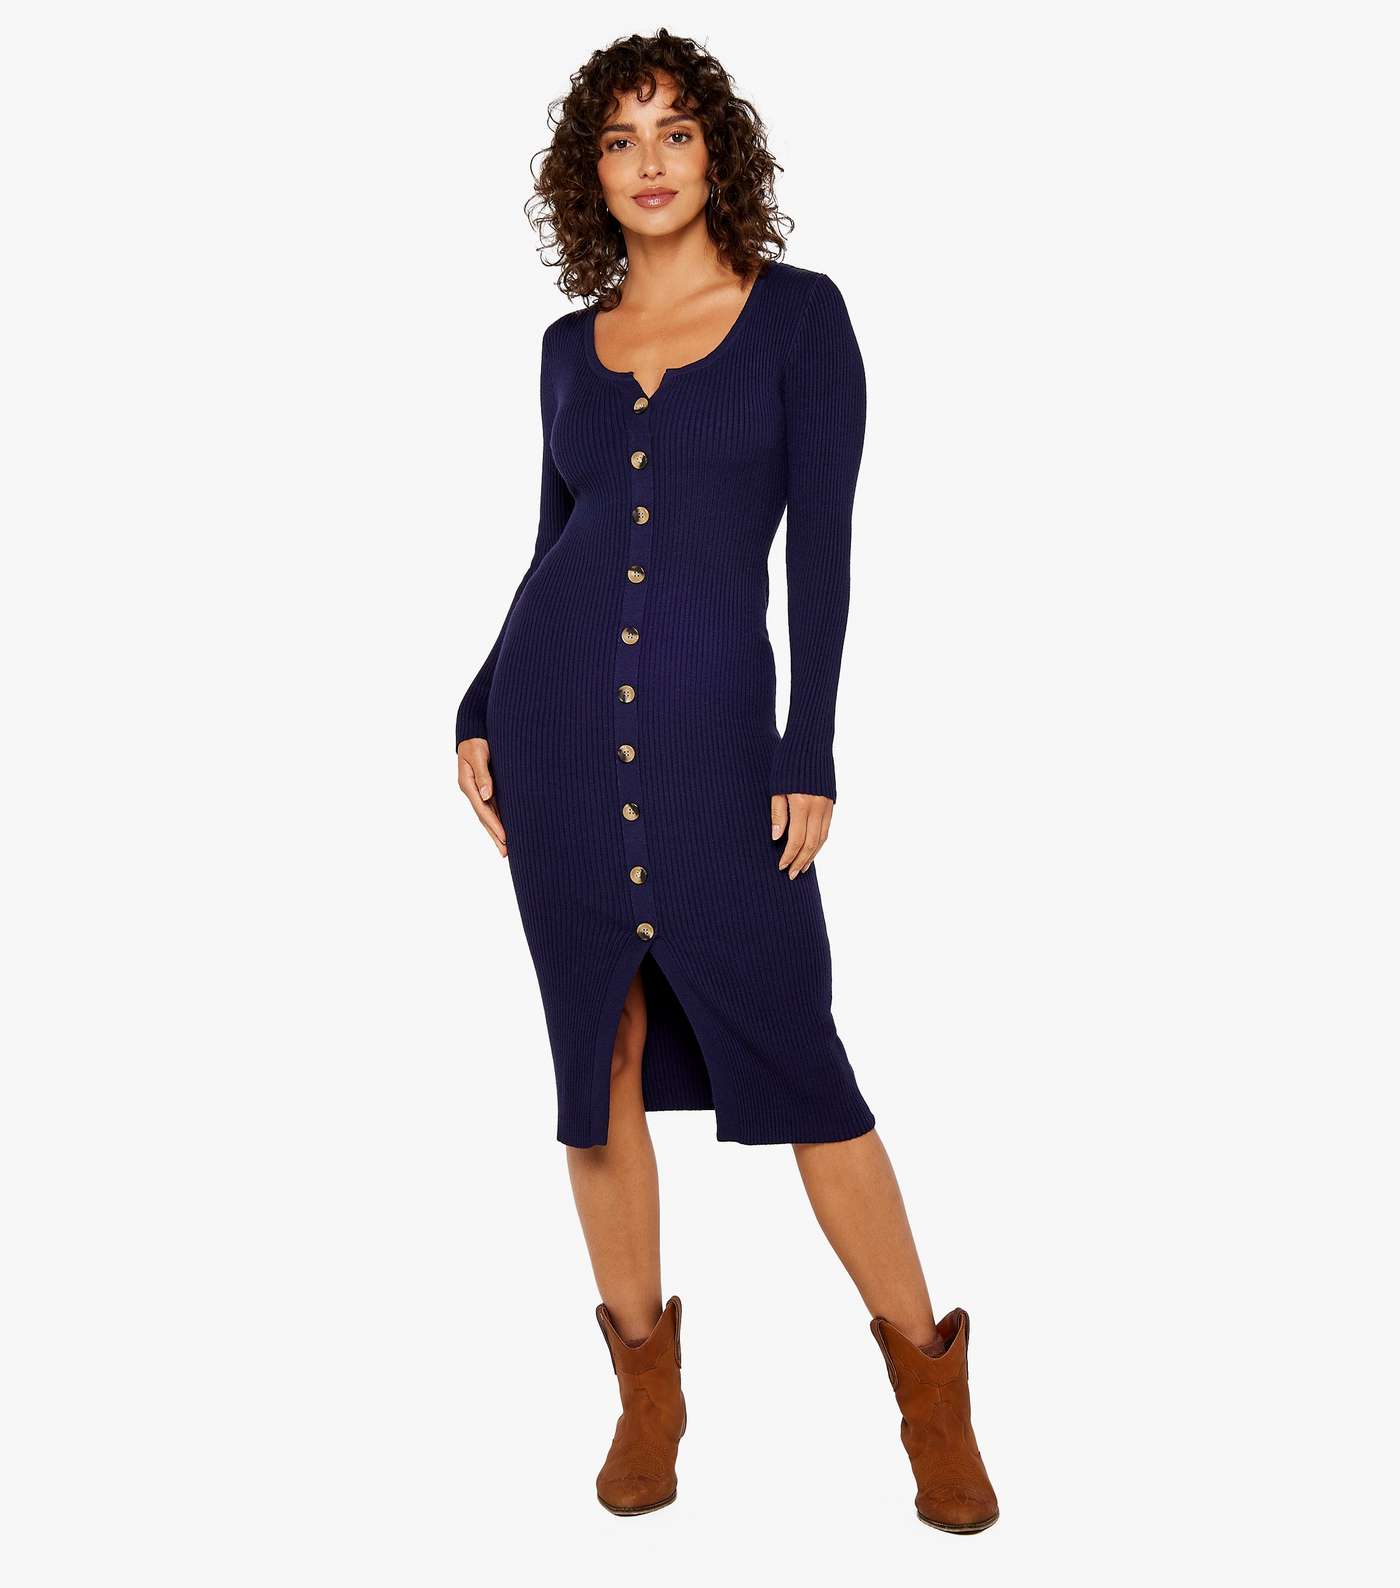 Apricot Navy Ribbed Knit Button Front Bodycon Midi Dress Image 2